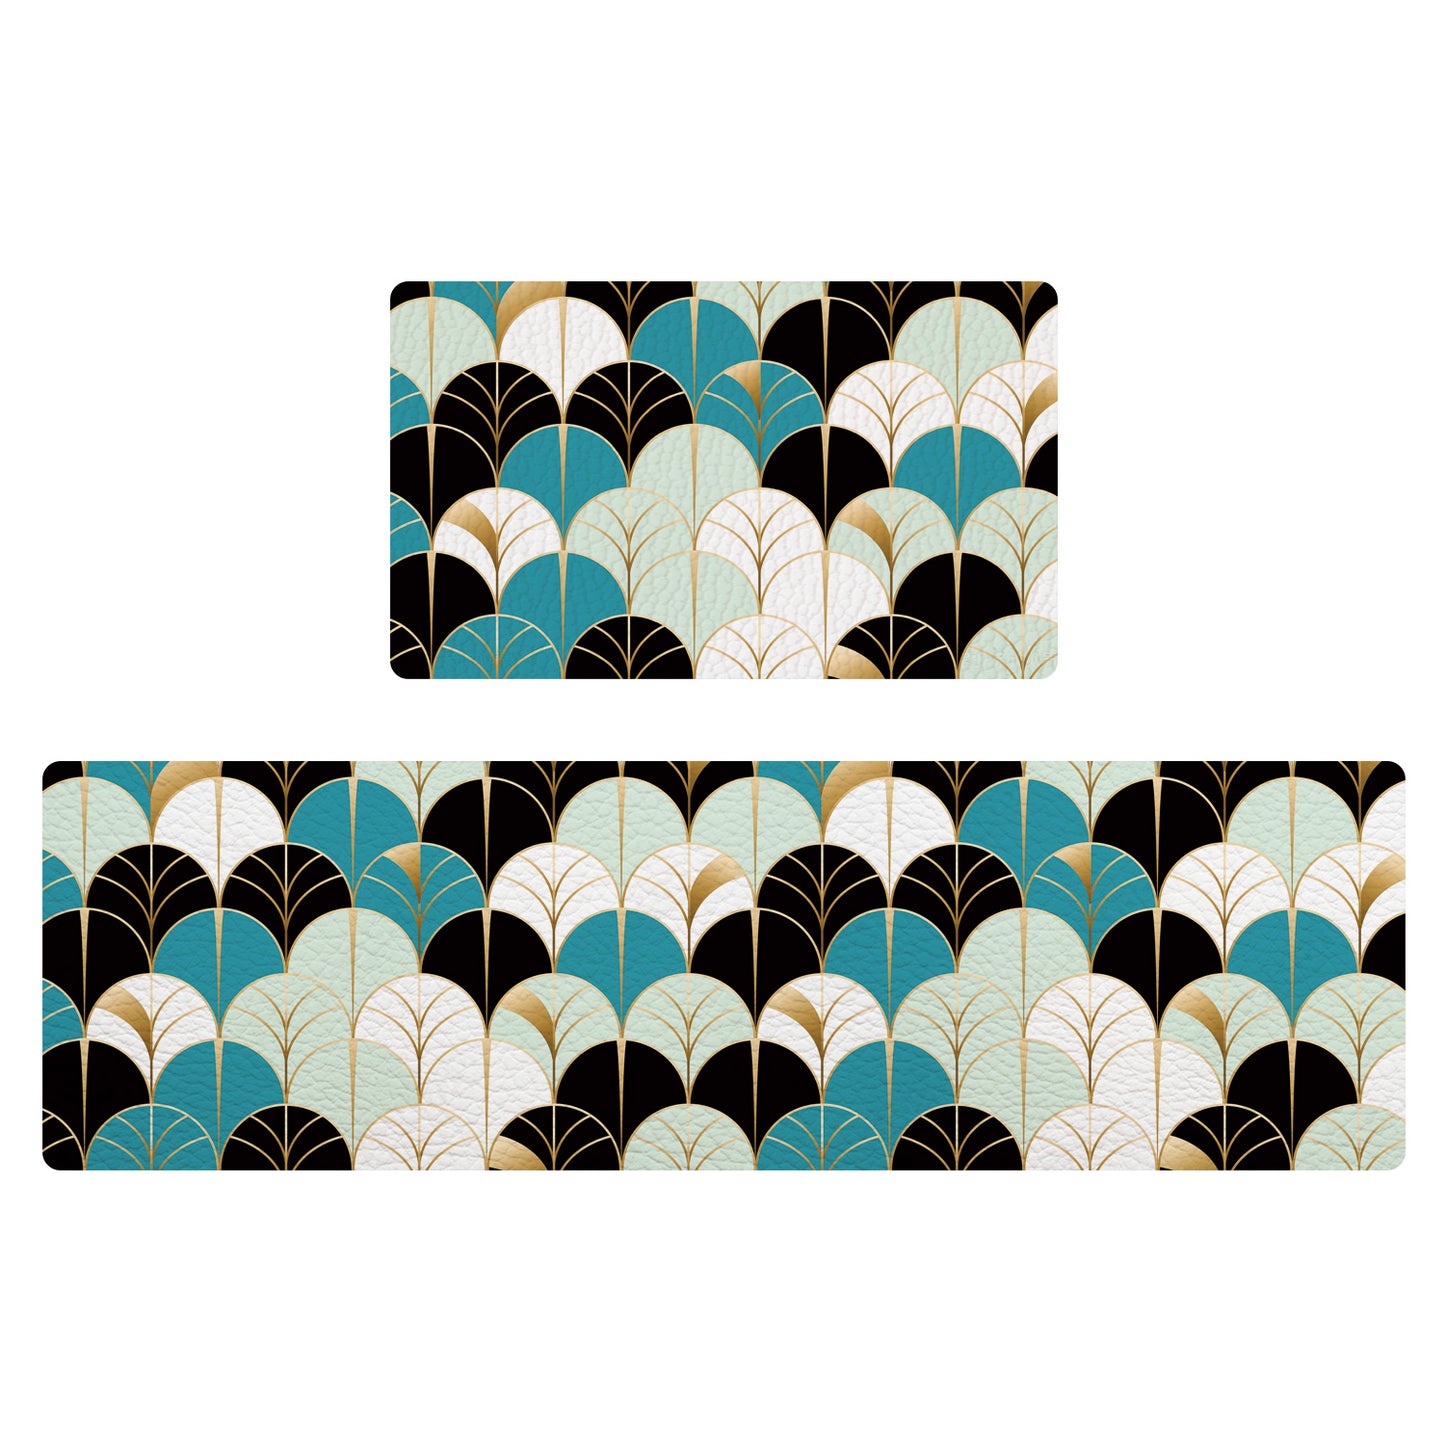 Feblilac Abstract Blue and Black Leaves PVC Leather Kitchen Mat @Frank’s design